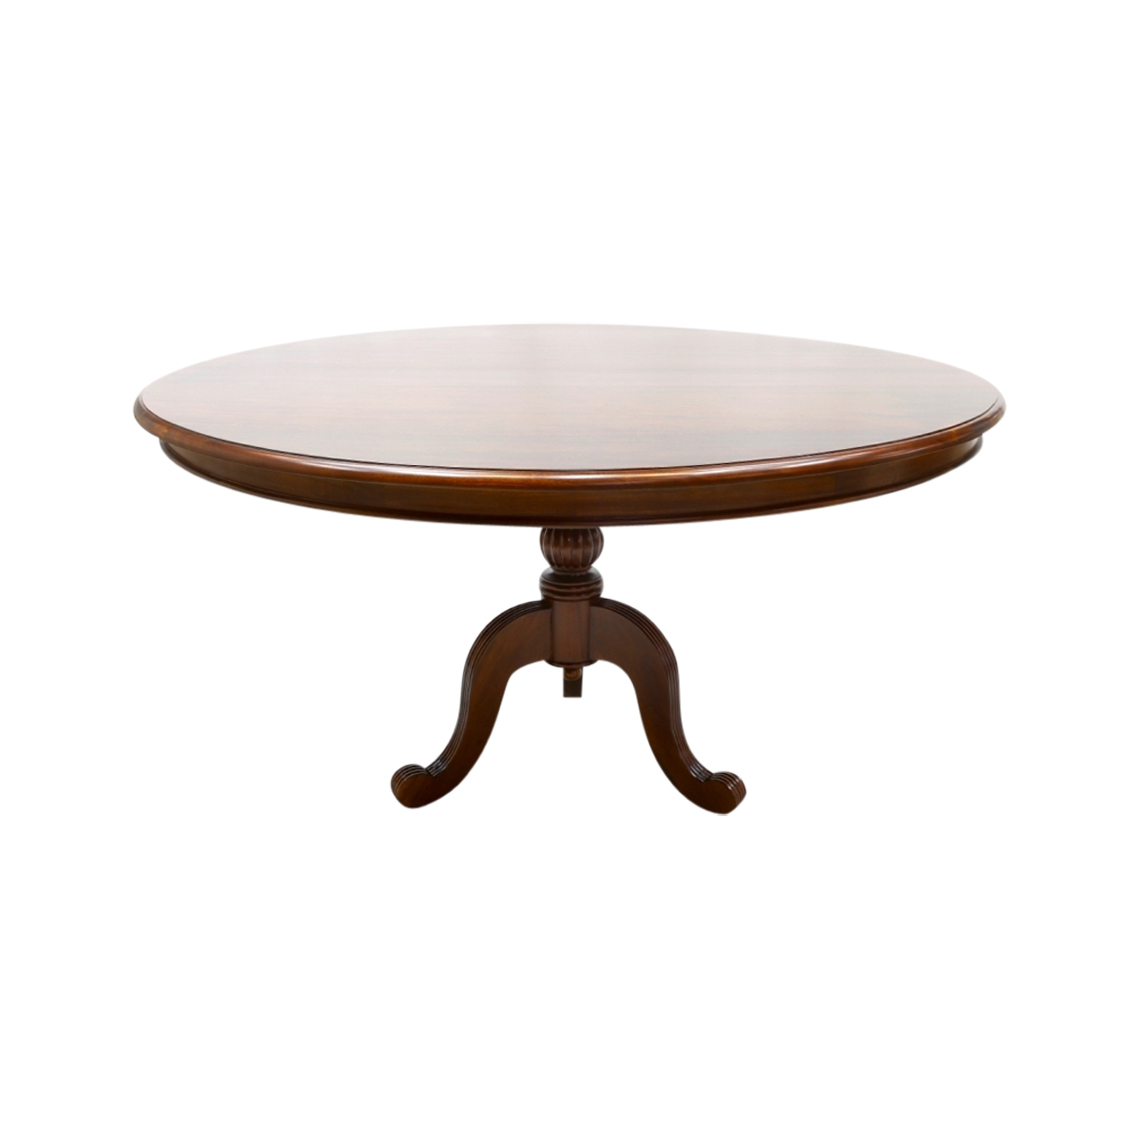 Round Dining Table, Antique Round Pedestal Table Au